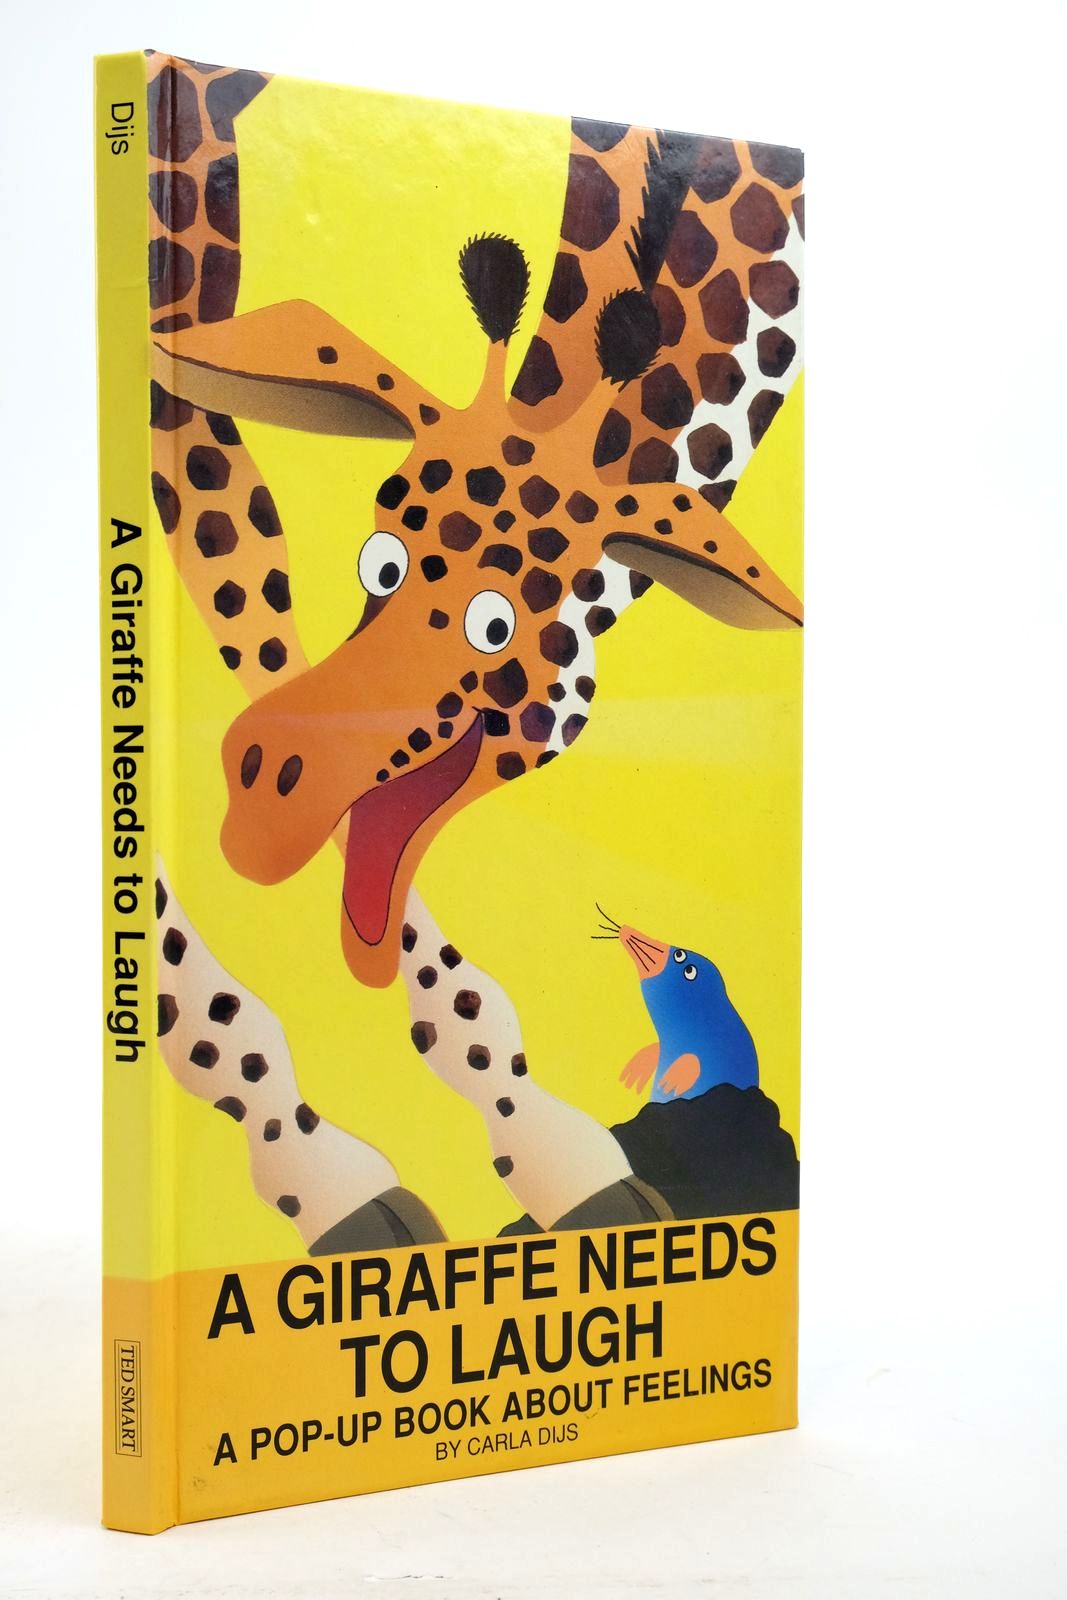 Photo of A GIRAFFE NEEDS TO LAUGH written by Dijs, Carla illustrated by Dijs, Carla published by The Book People Ltd. (STOCK CODE: 2140911)  for sale by Stella & Rose's Books